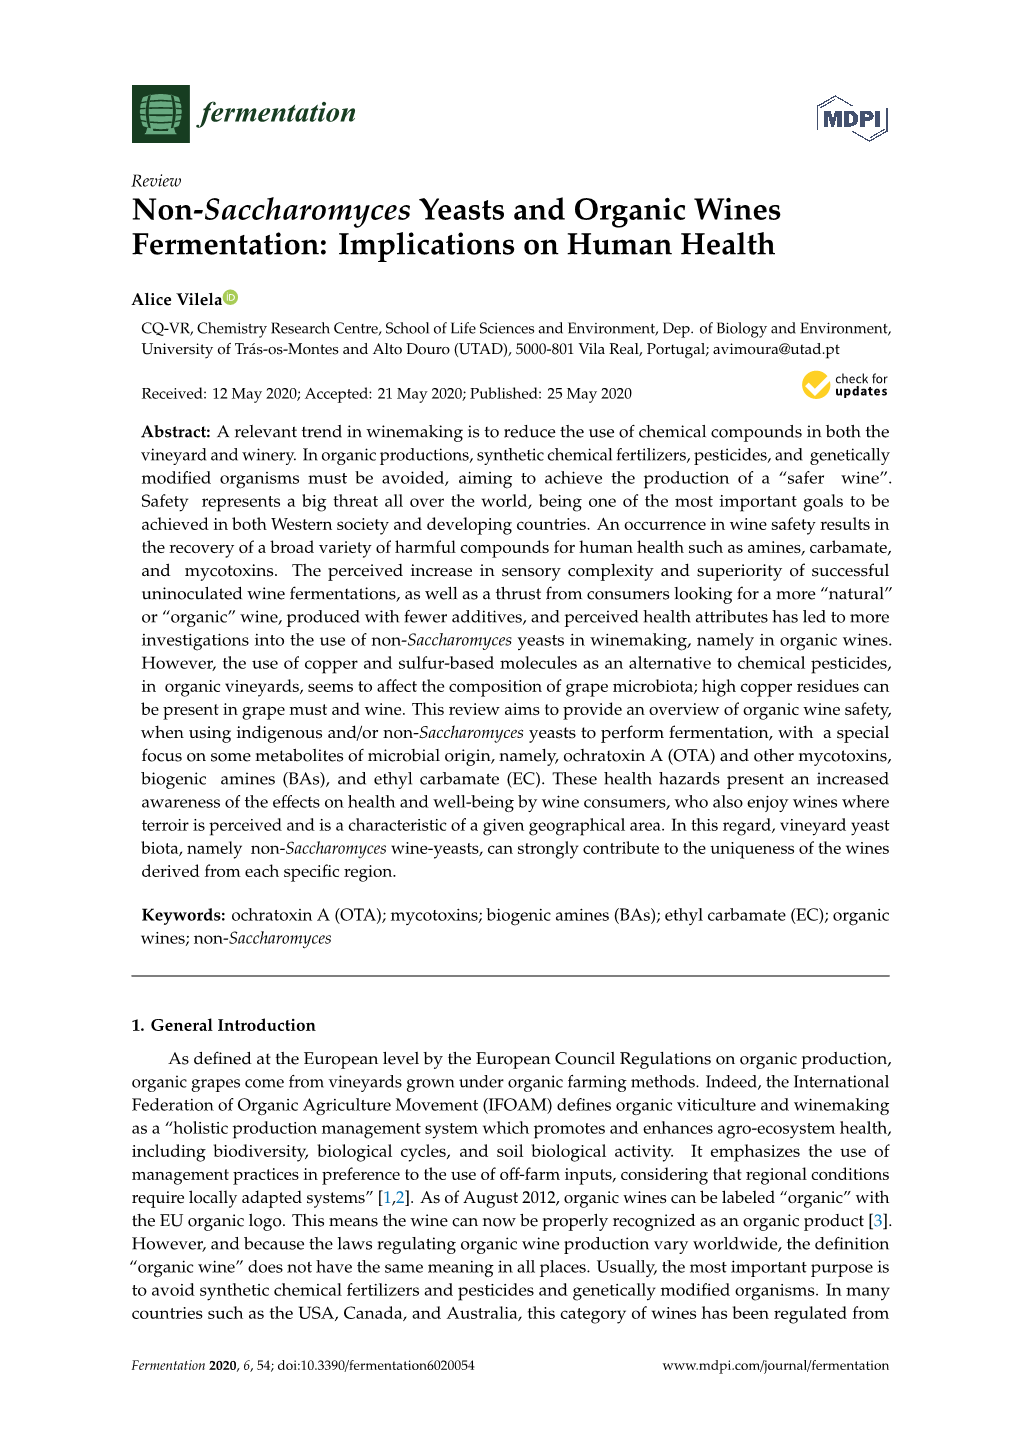 Non-Saccharomyces Yeasts and Organic Wines Fermentation: Implications on Human Health